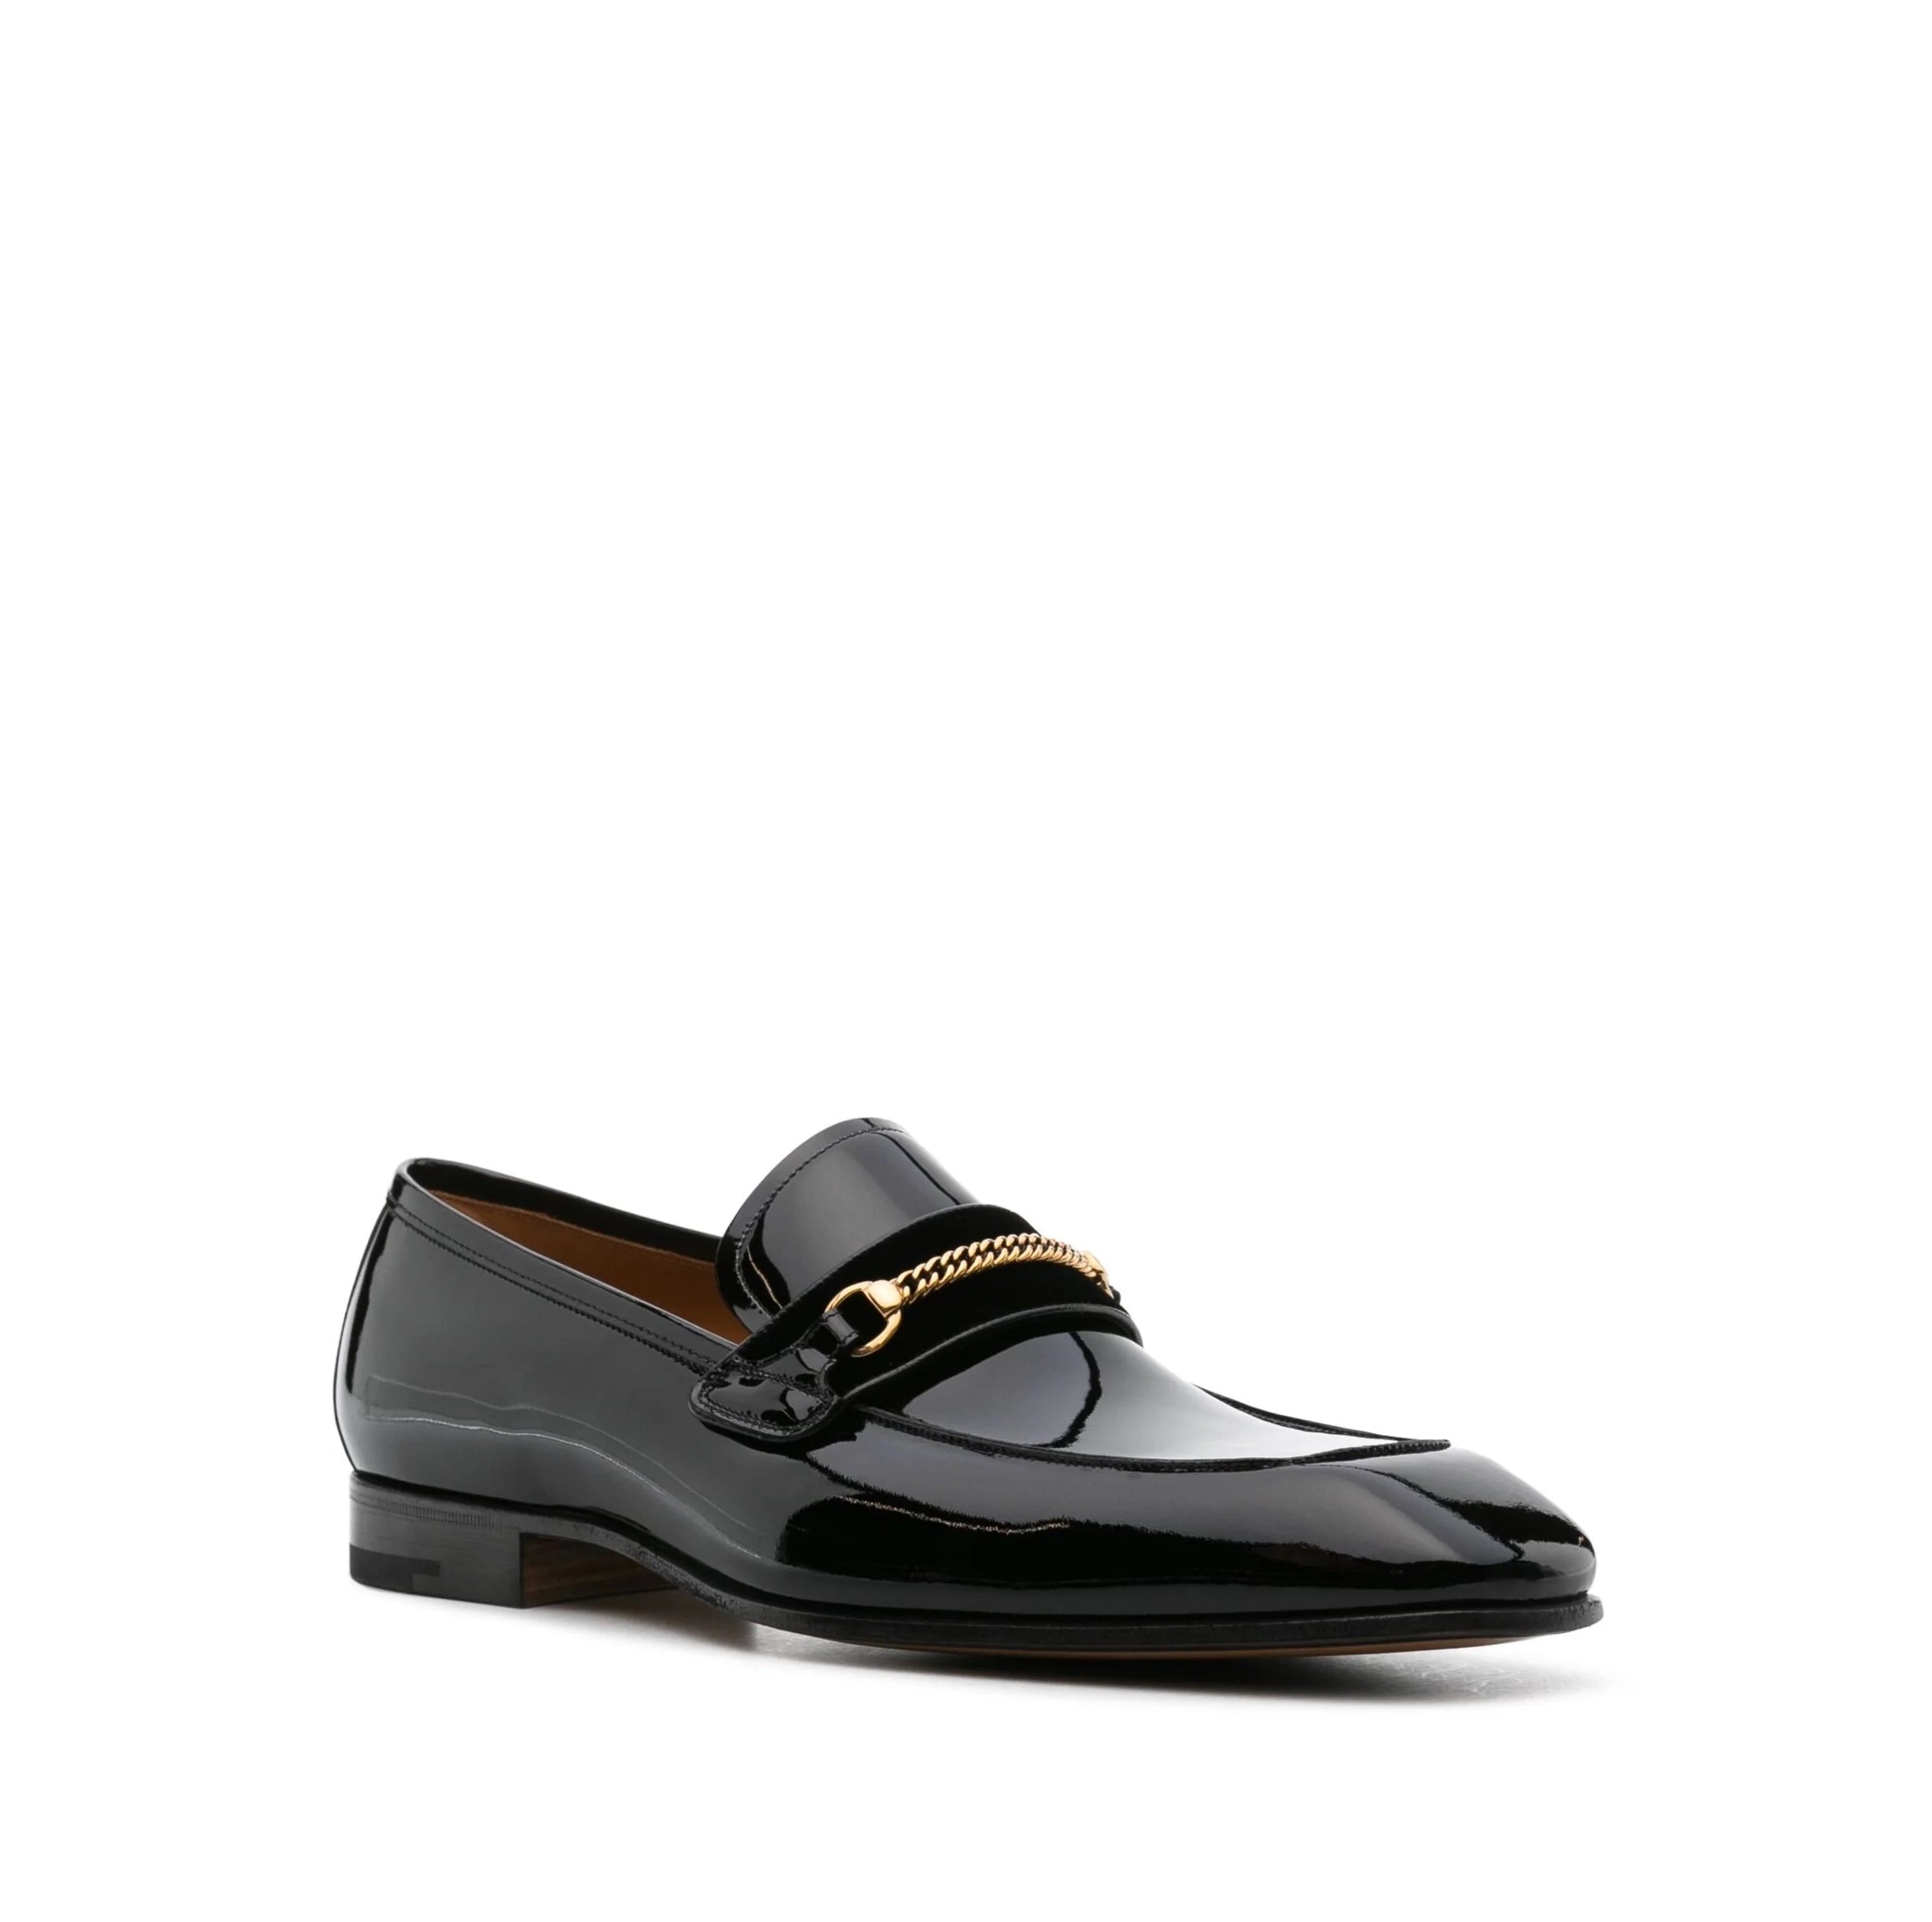 Bailey Chain leather loafers